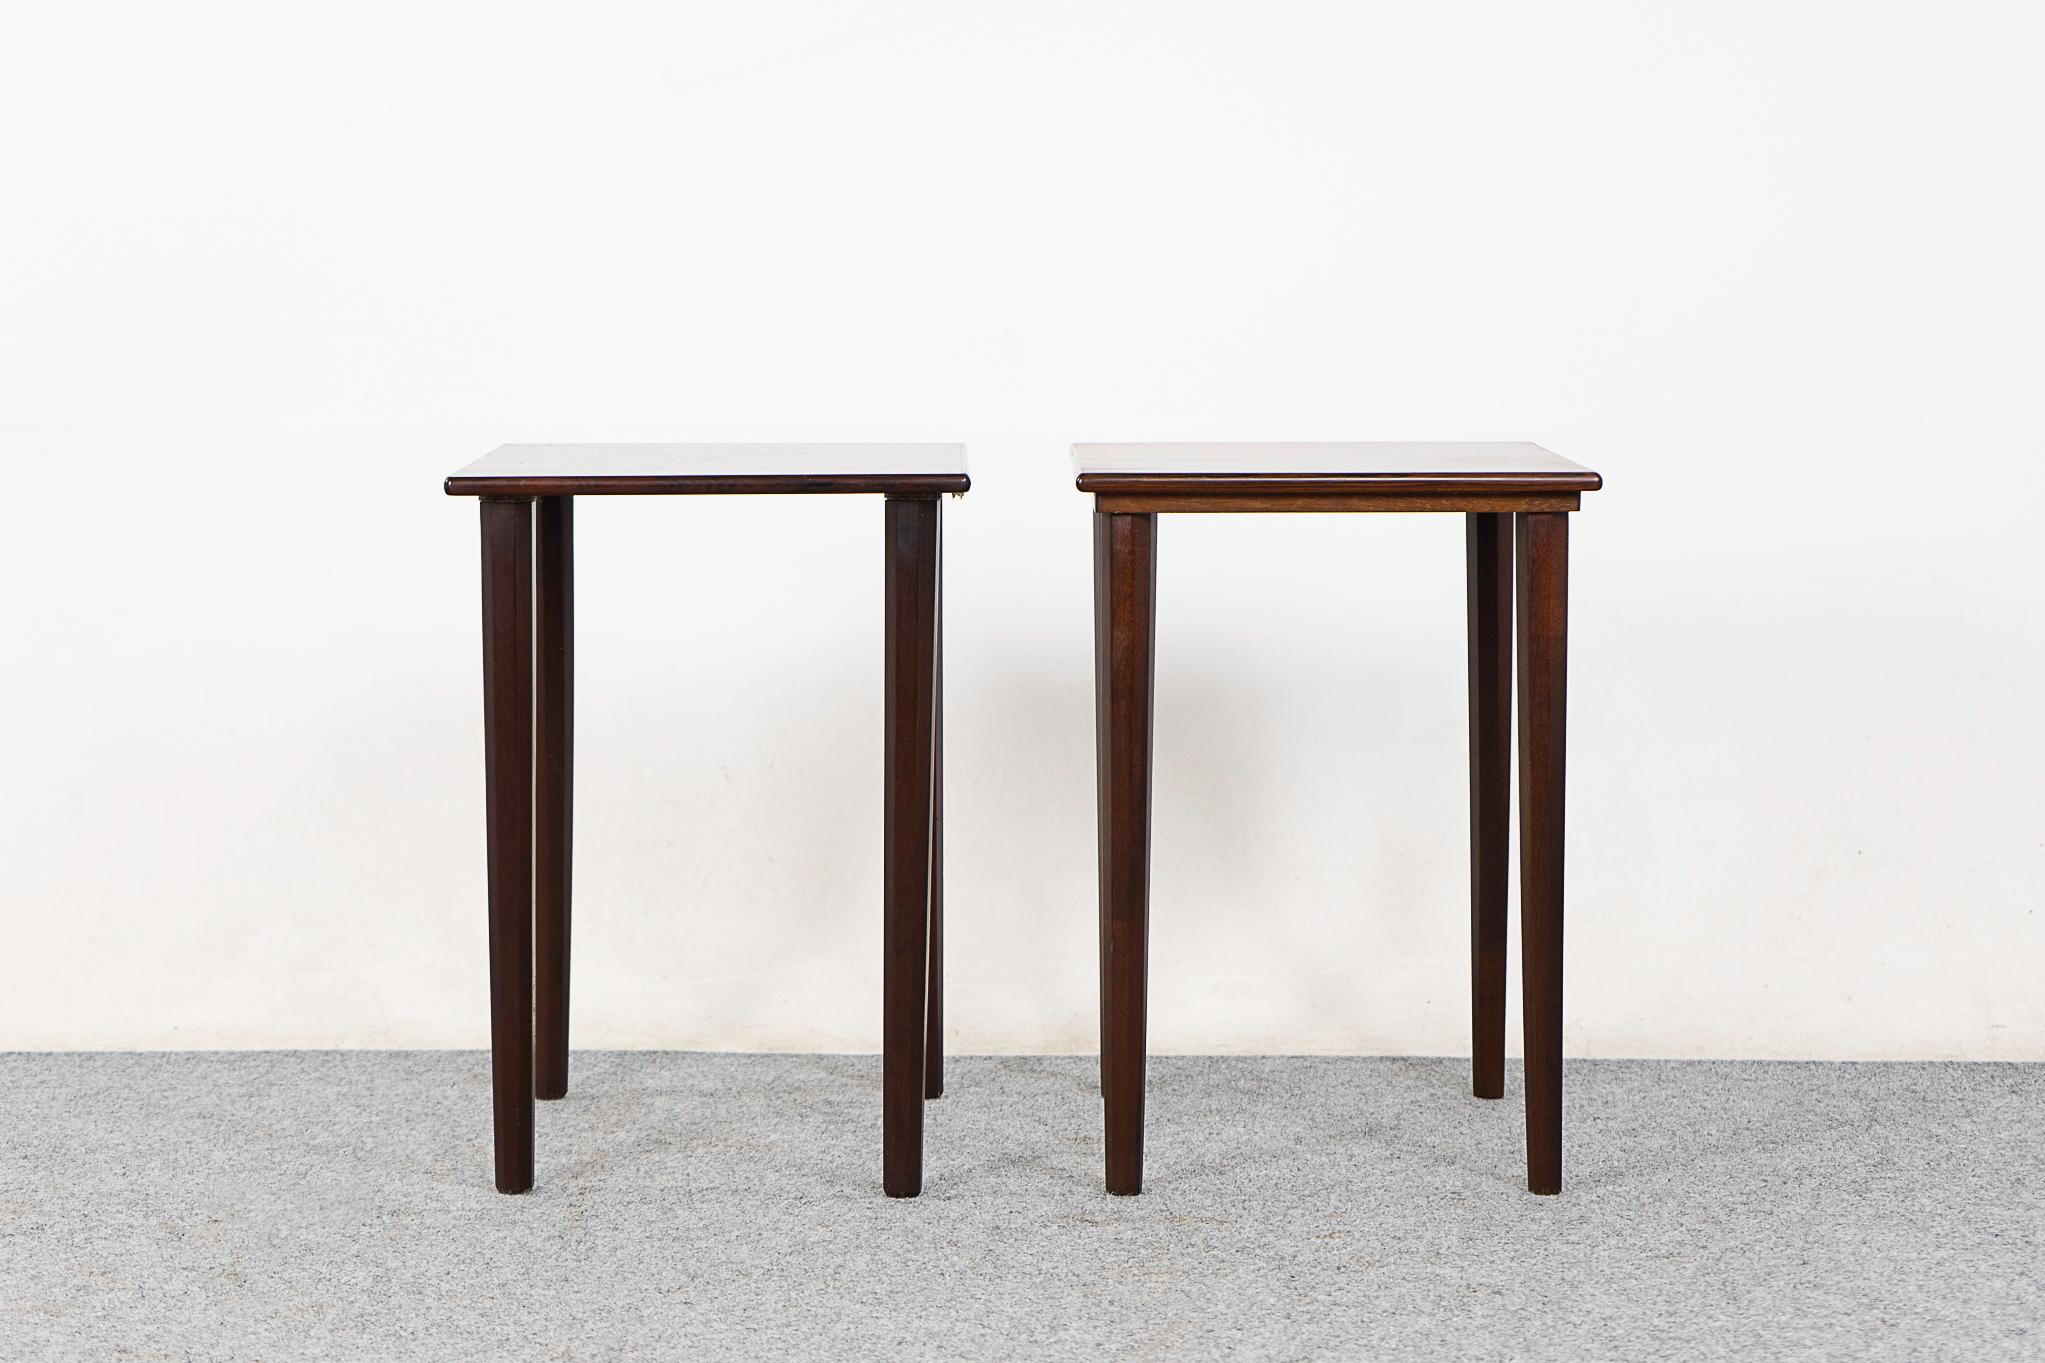 Rosewood side tables, circa 1960's. Long tapered legs and beautifully bookmatched veneer surfaces. Sleek!

Unrestored item, some marks consistent with age.